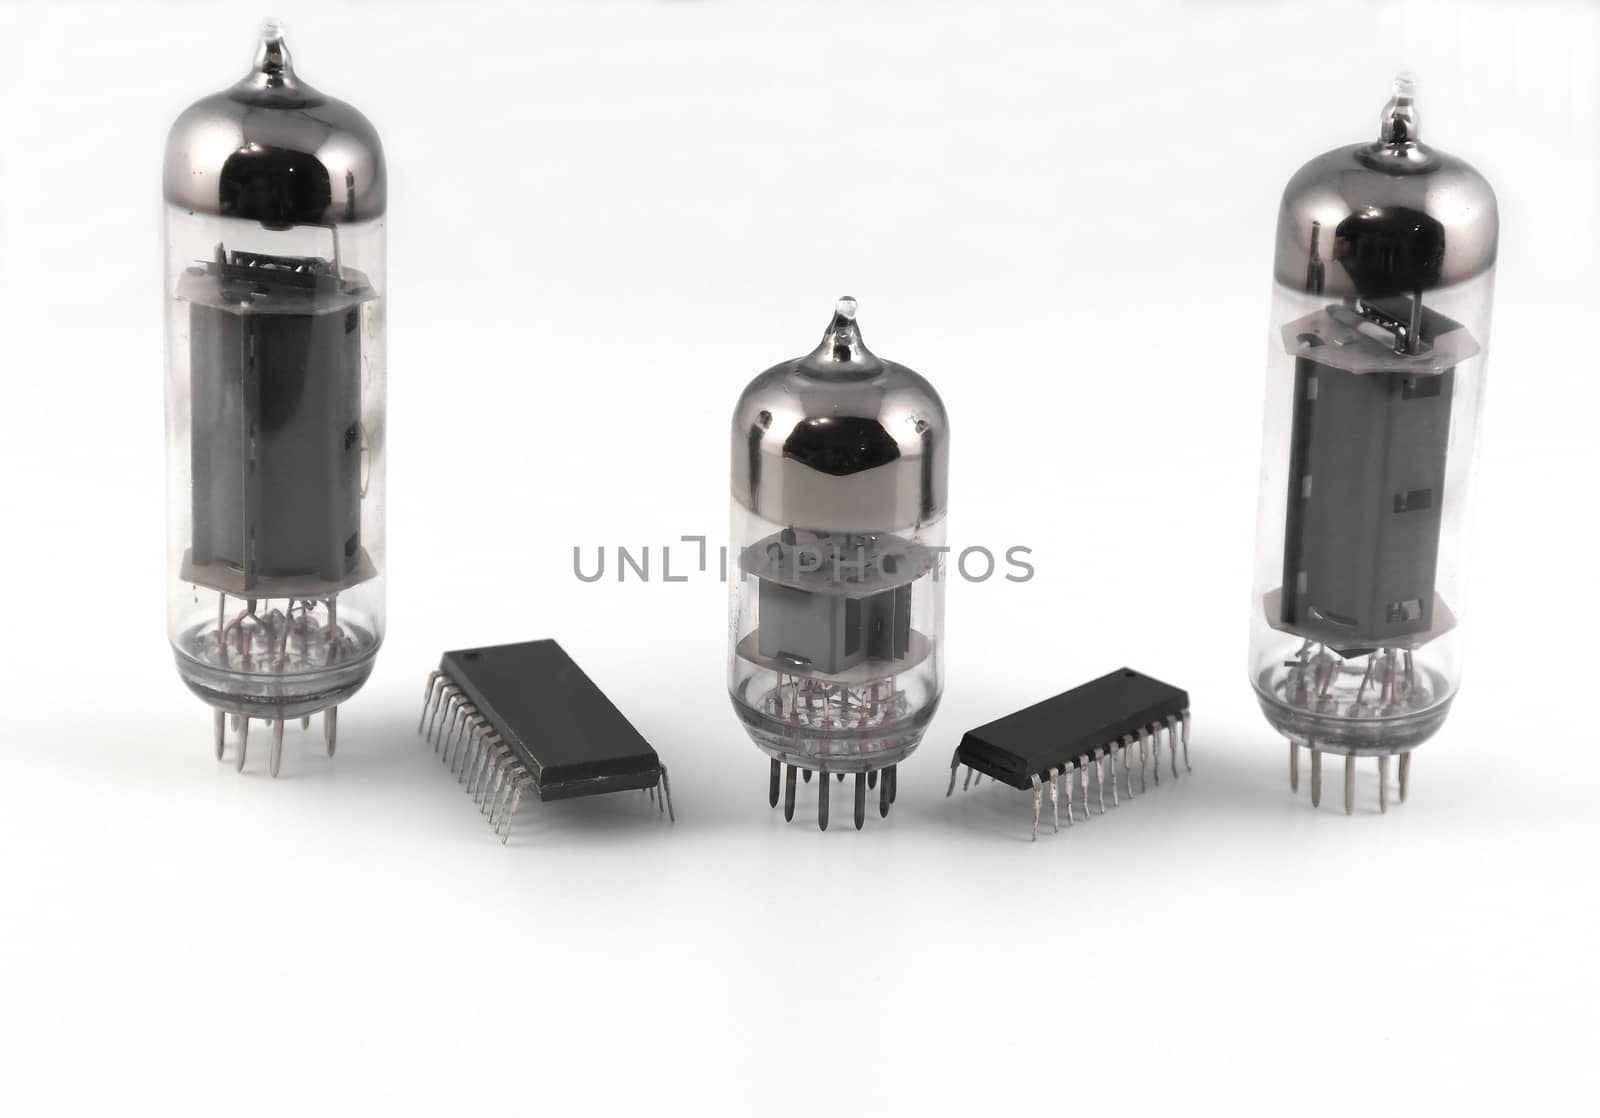 Vacuum radio tubes and microchips over white